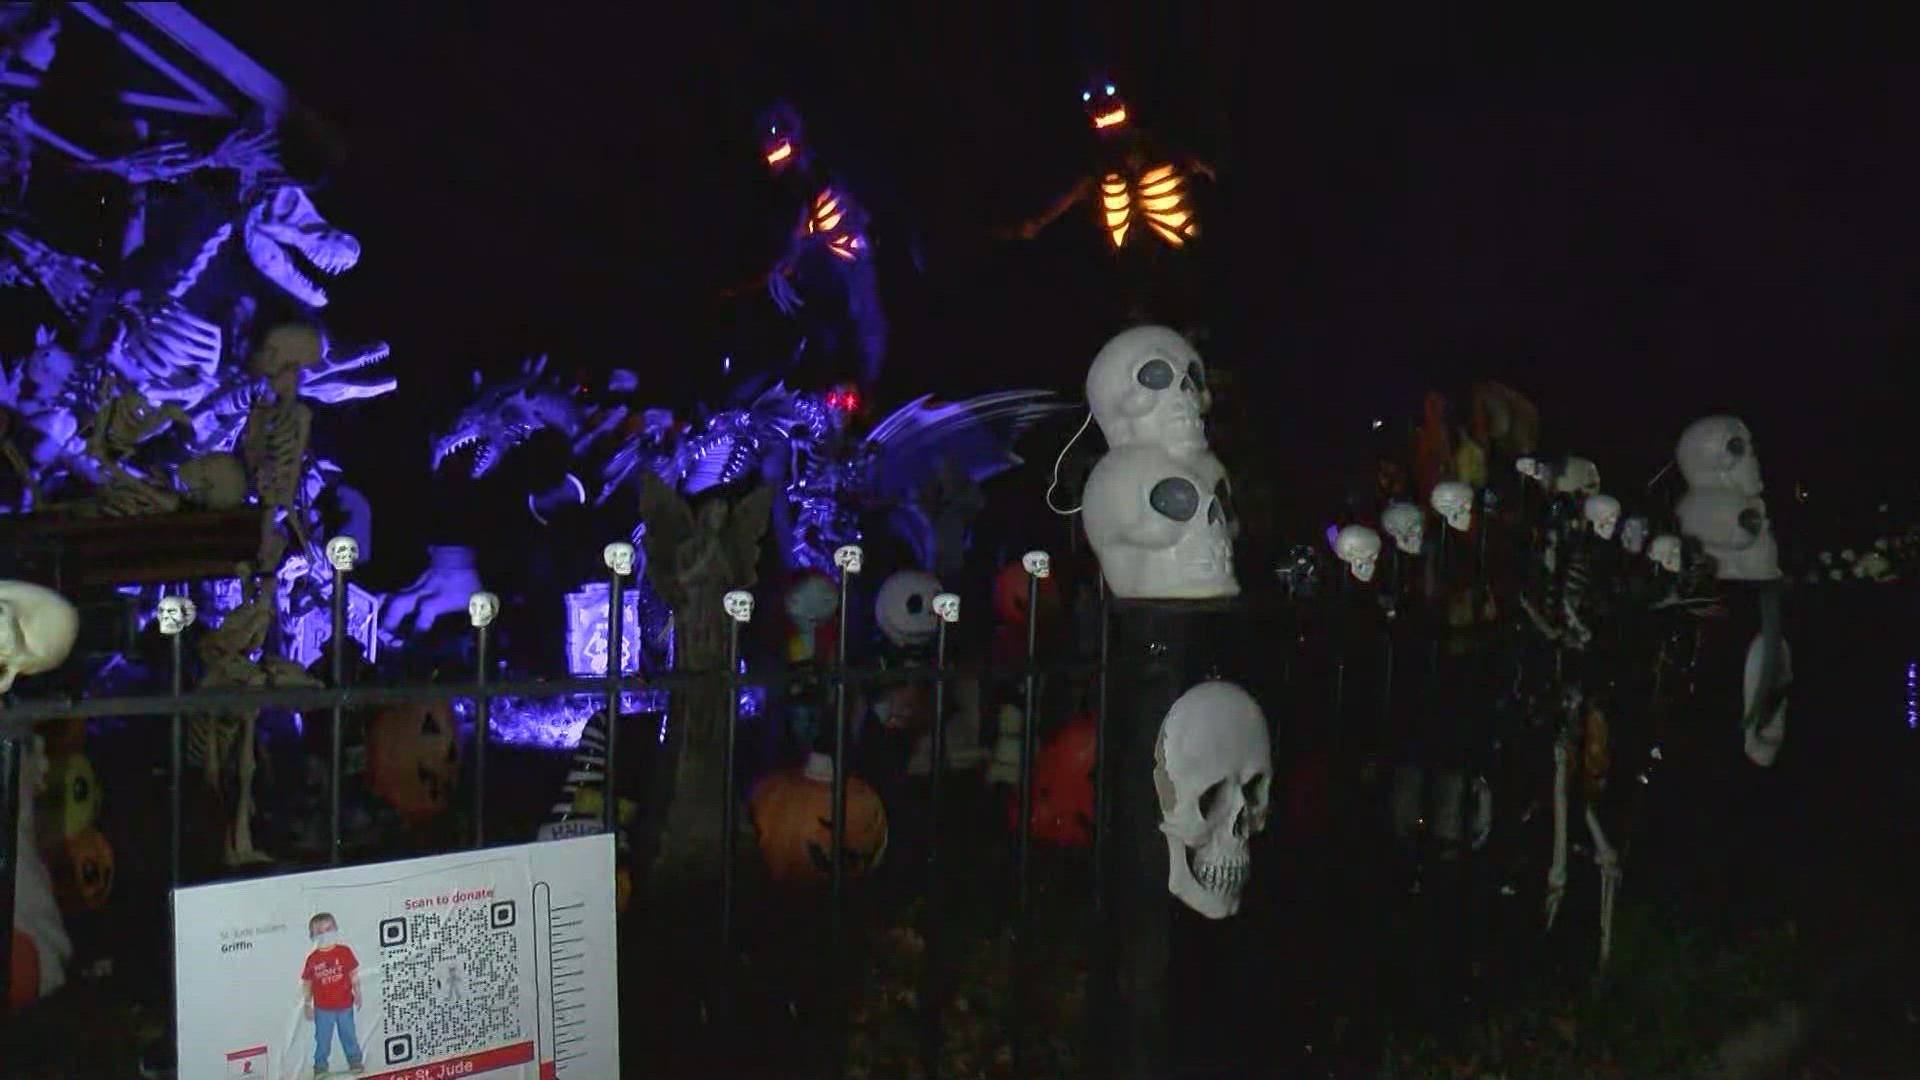 Two local homes are using Halloween decorations to raise money for St. Jude's Children's Hospital, through a nationwide effort to raise $150,000 dollars.